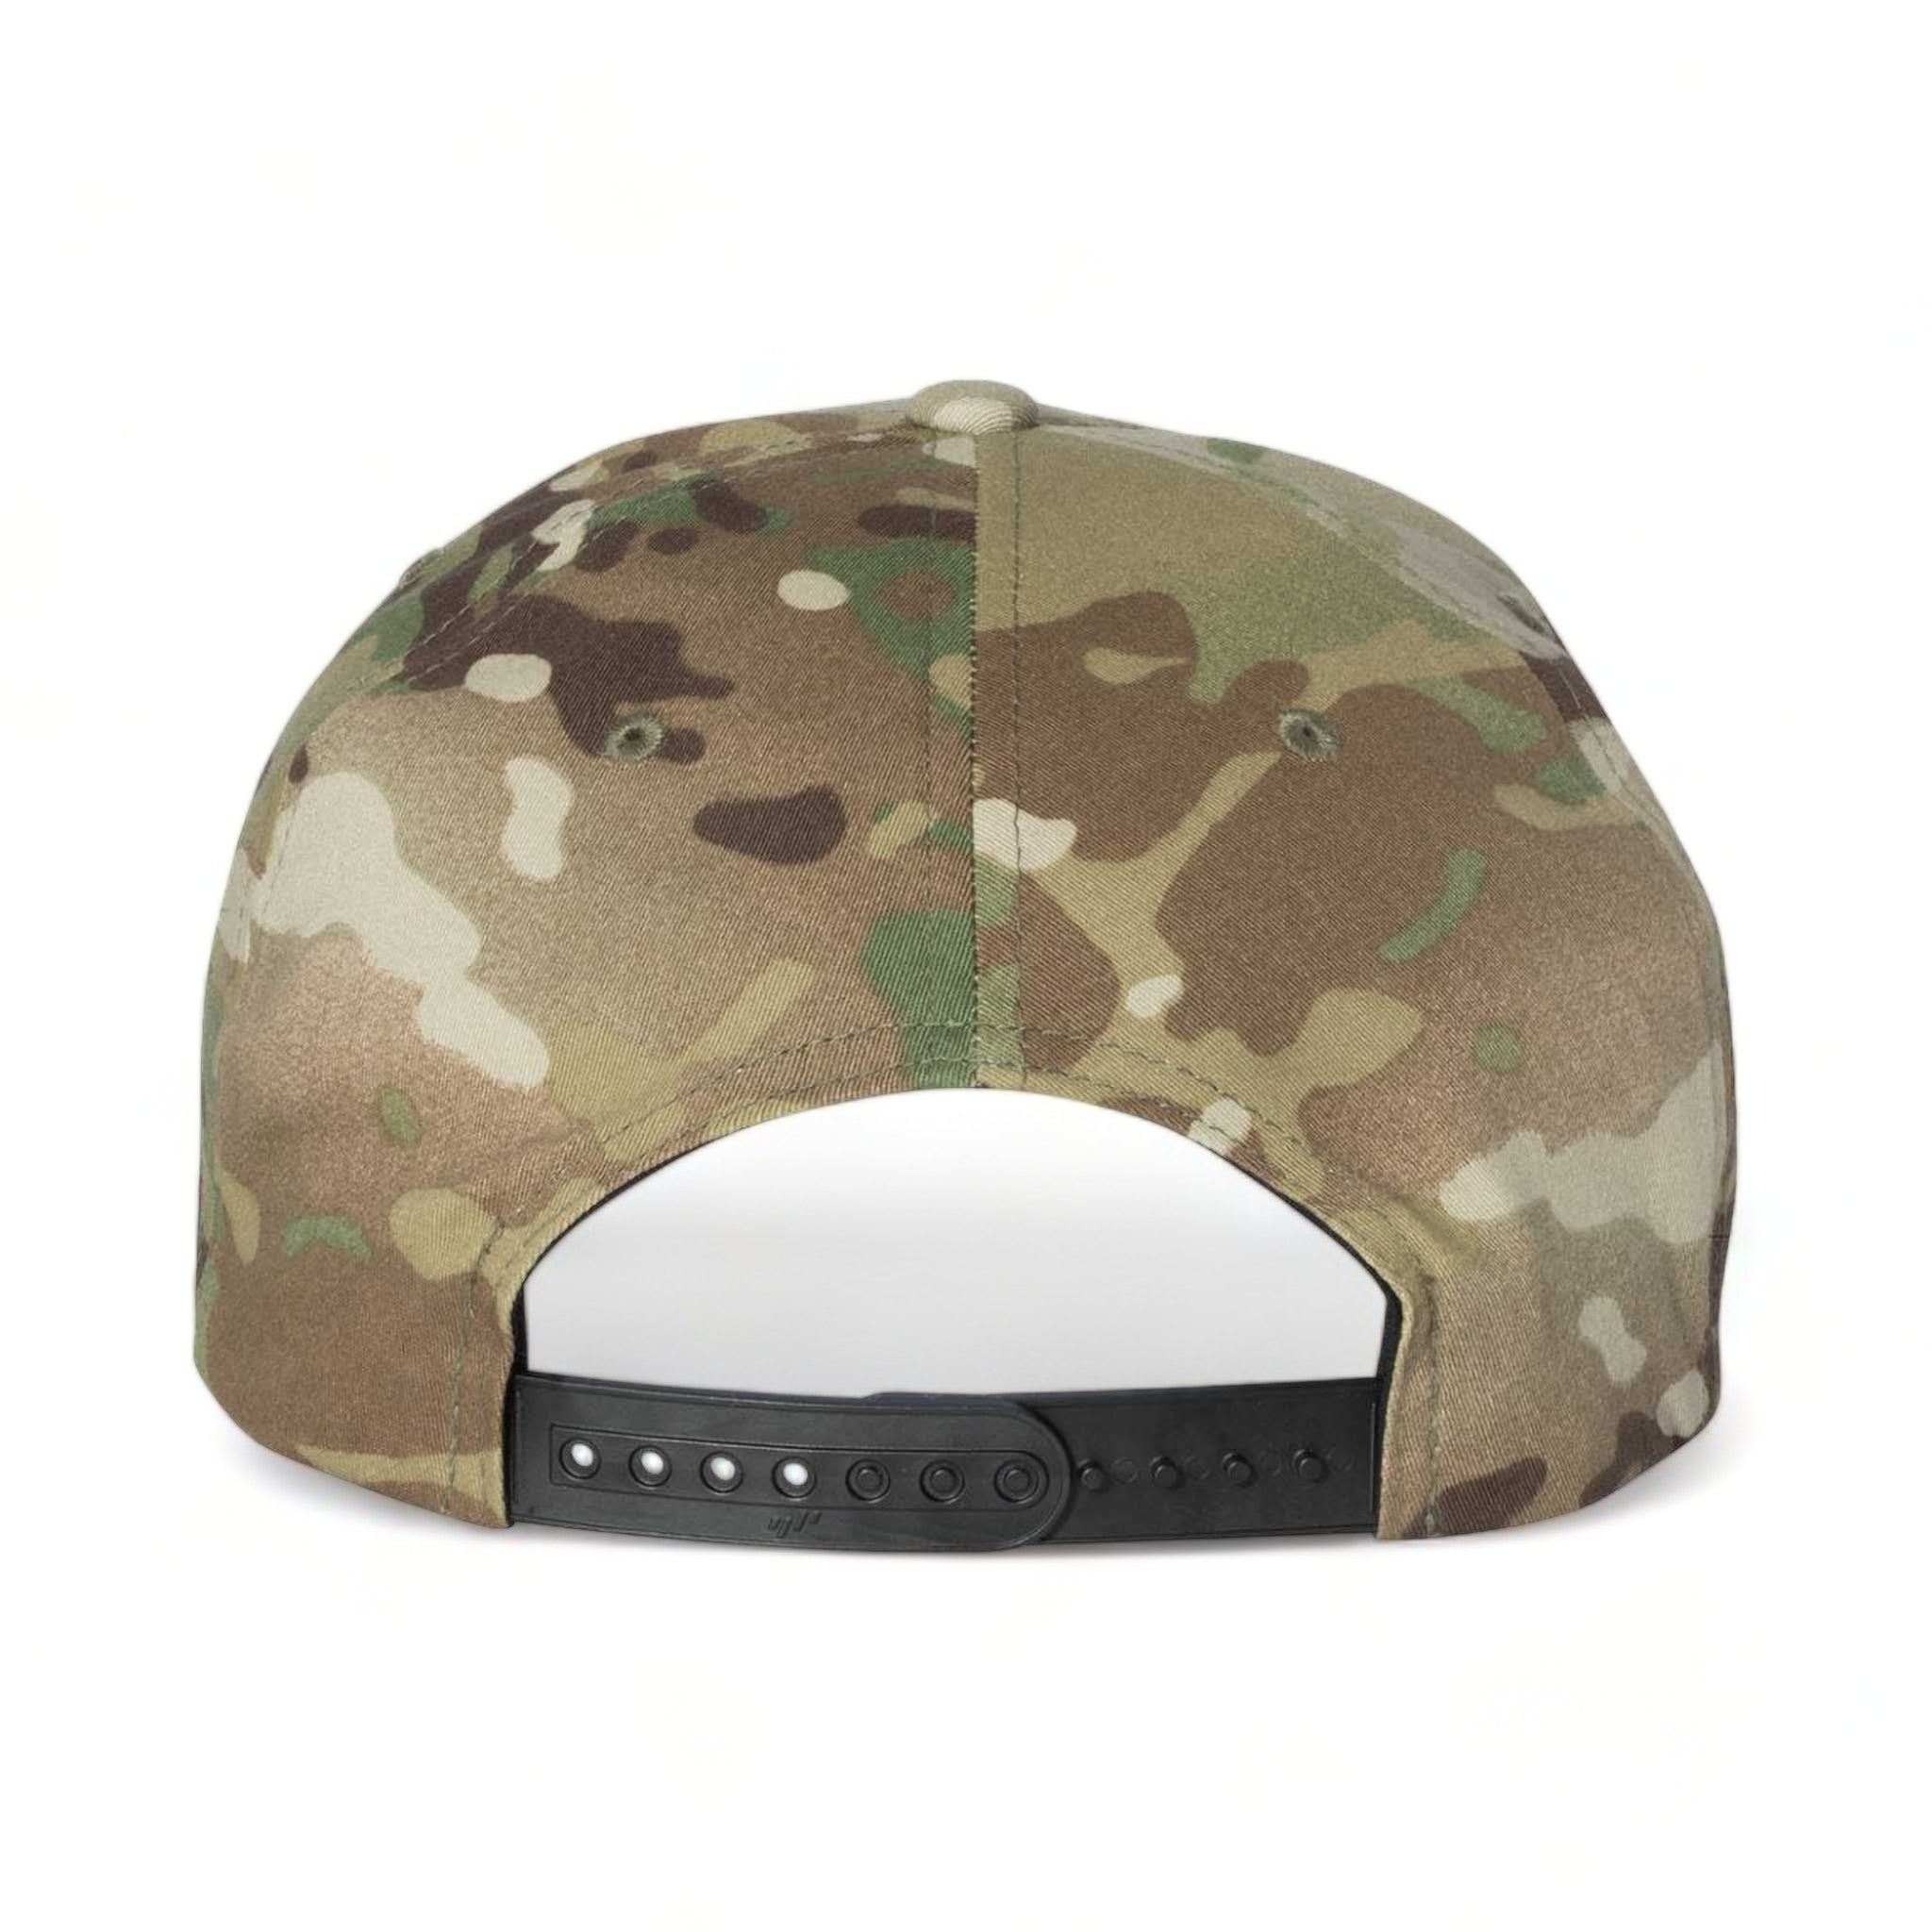 Back view of YP Classics 6089M custom hat in multicam green